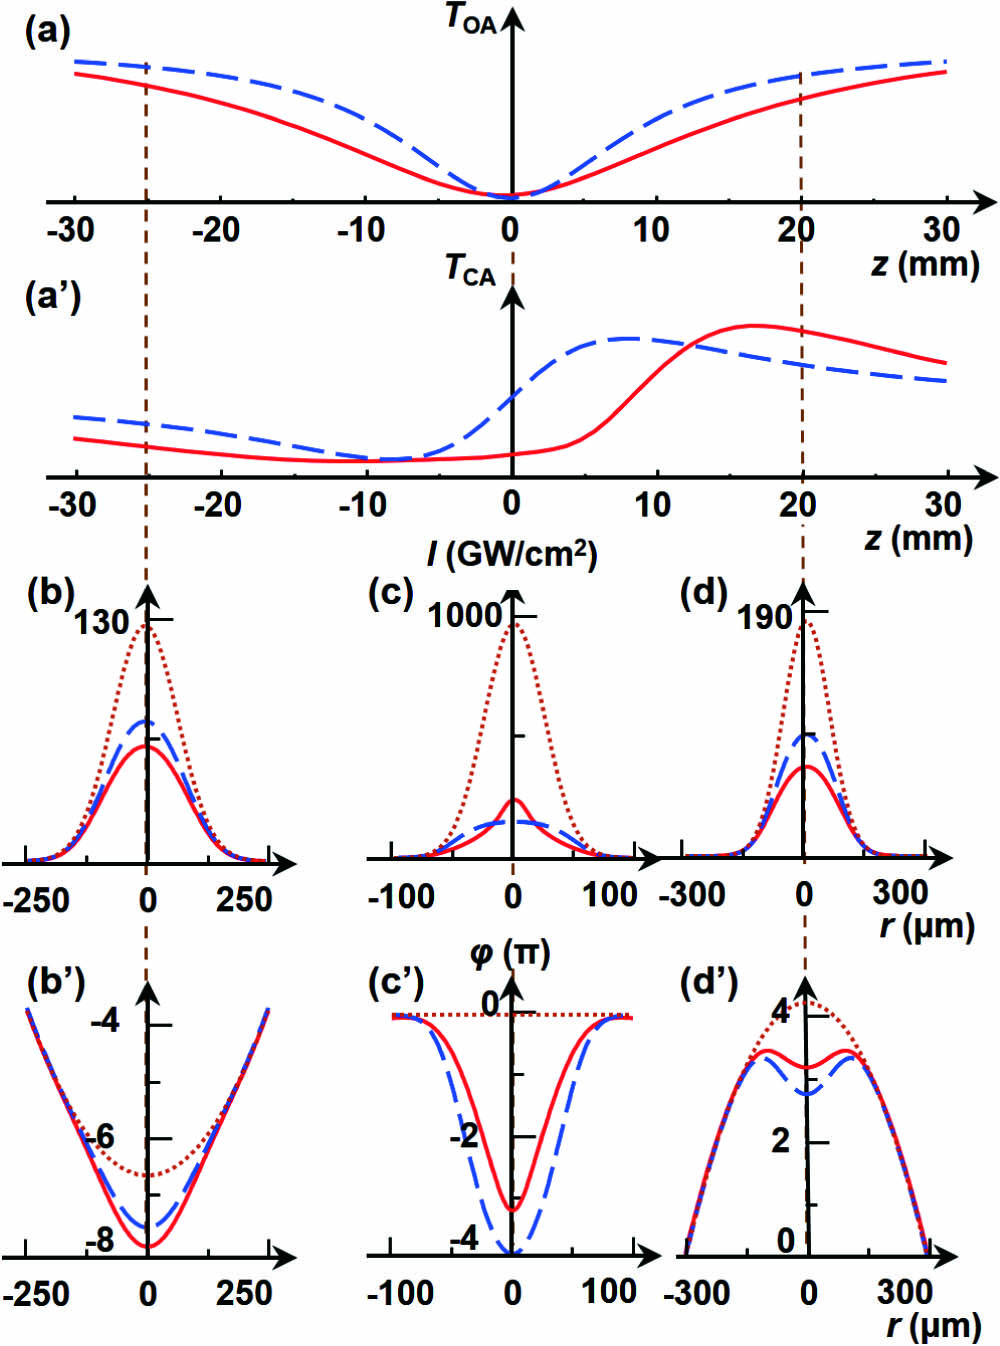 Fitting curves of (a) OA and (a’) CA transmittances by two models for sample thickness of 1 mm and laser peak intensity of 967 GW · cm−2 shown in Figs. 1(d) and 1(d’), with (b)–(d) intensity distributions and (b’)–(d’) phase distributions at the exit plane of the sample at z=−25, 0, 20 mm. Blue dashed lines and red lines are curves simulated using SBM and BPDM, respectively. The brown dotted lines in (b)–(d), (b’)–(d’) are plotted at the entrance plane of the sample.